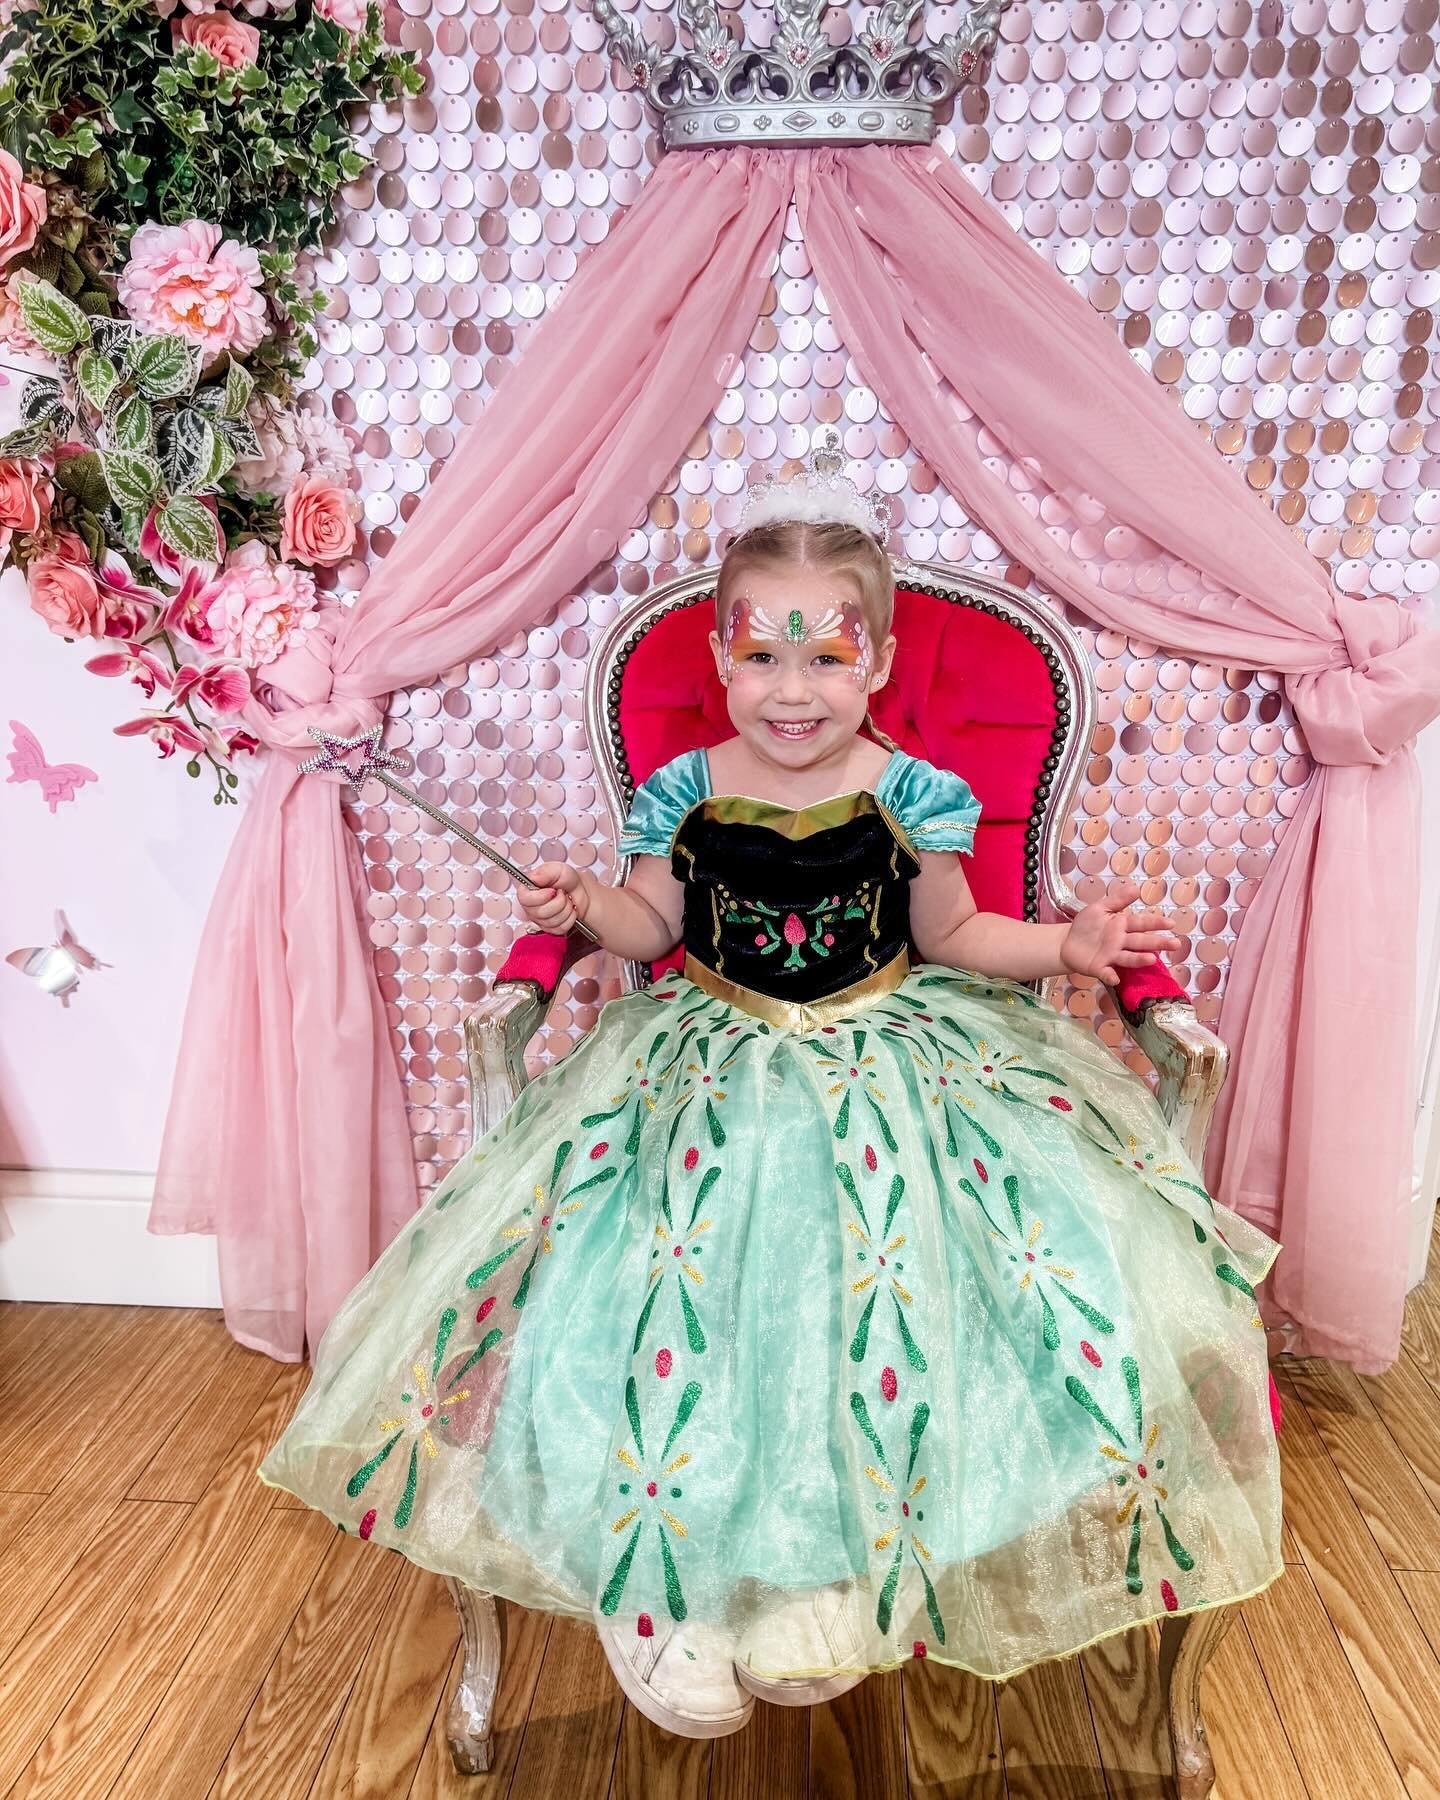 Today&rsquo;s delightful little princess makeover, such a cutie, makes me love my job even more! 💞👑 

#princessmakeover #princesspamper #childrensmakeover #childrensspa #princessexperience #princessboutique #bibitybobityboo